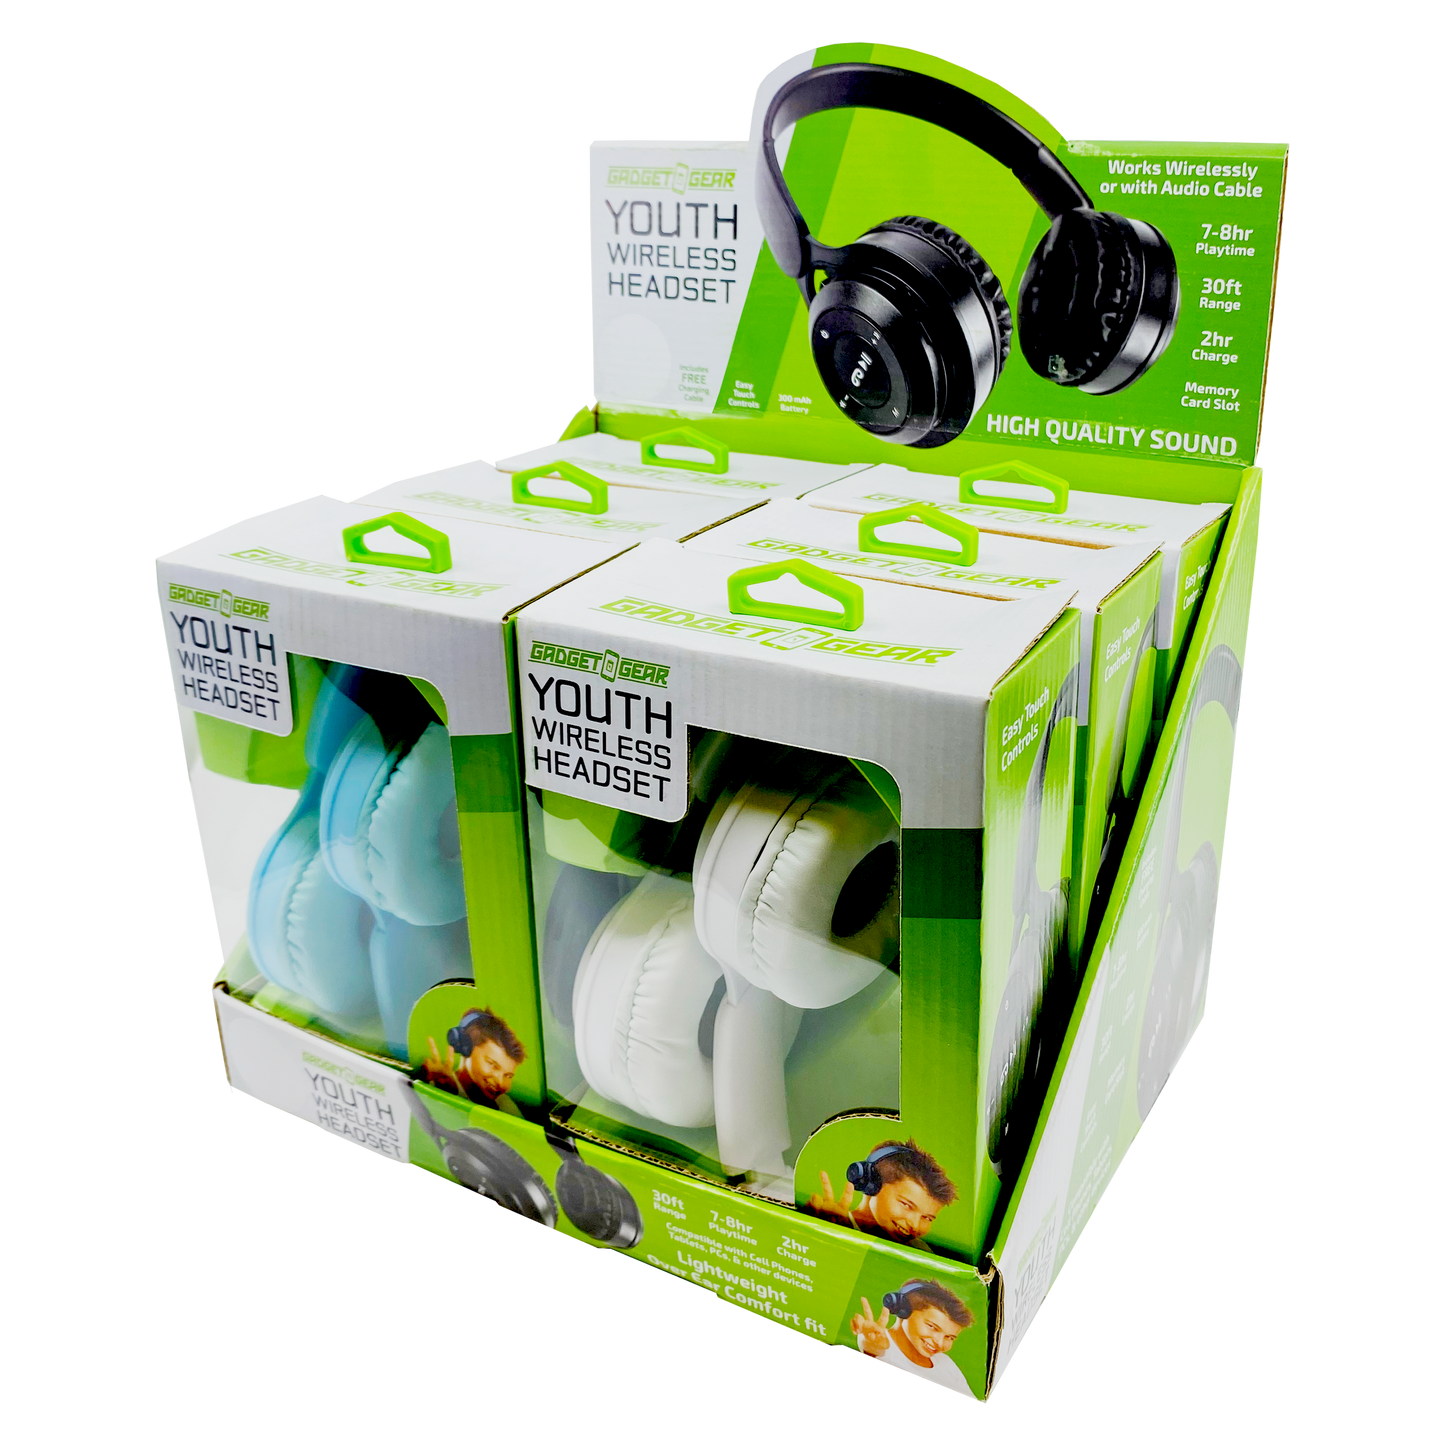 ITEM NUMBER 023724 WIRELESS YOUTH HEADPHONES 6 PIECES PER DISPLAY